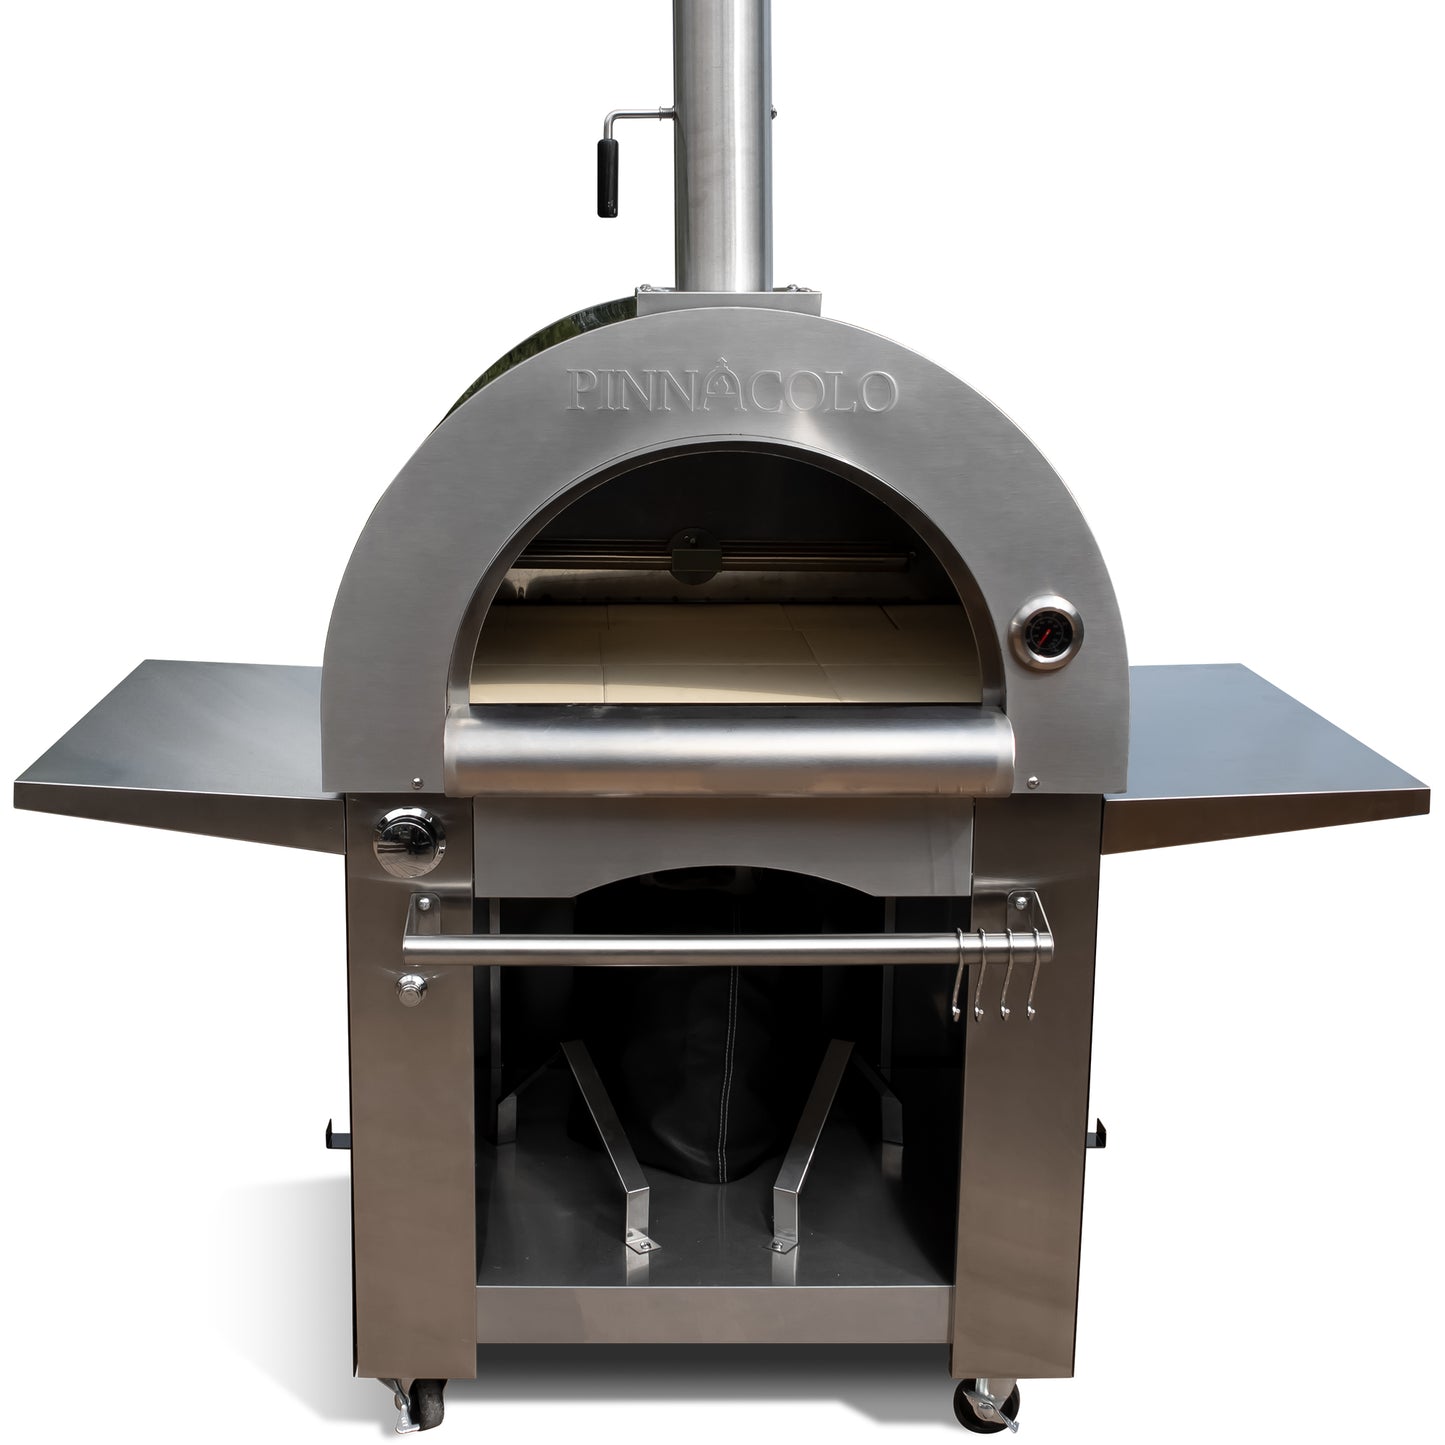 PINNACOLO | IBRIDO (HYBRID) Gas/Wood Pizza Oven With Accessories - PPO103